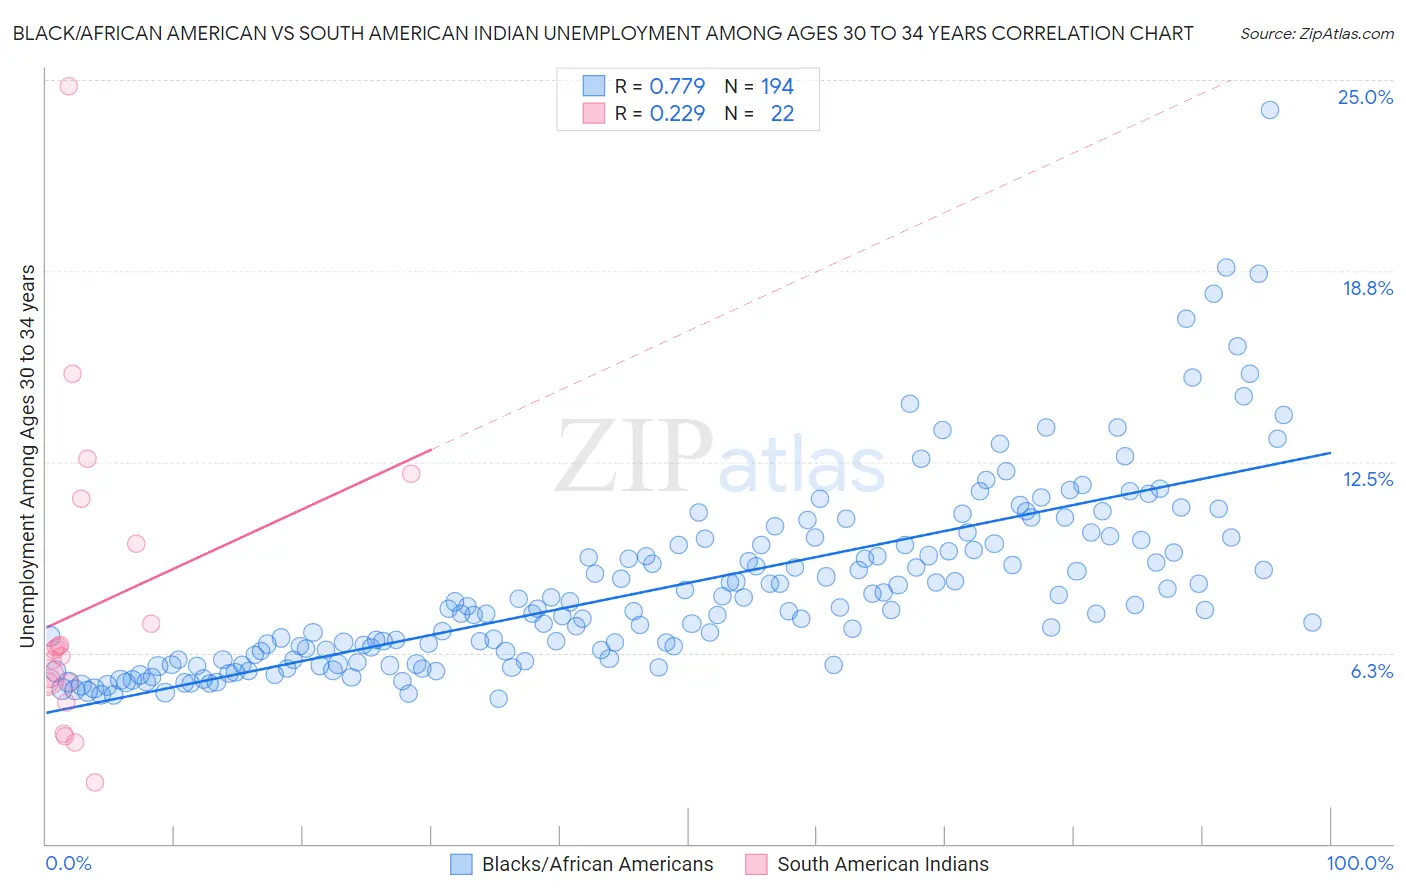 Black/African American vs South American Indian Unemployment Among Ages 30 to 34 years